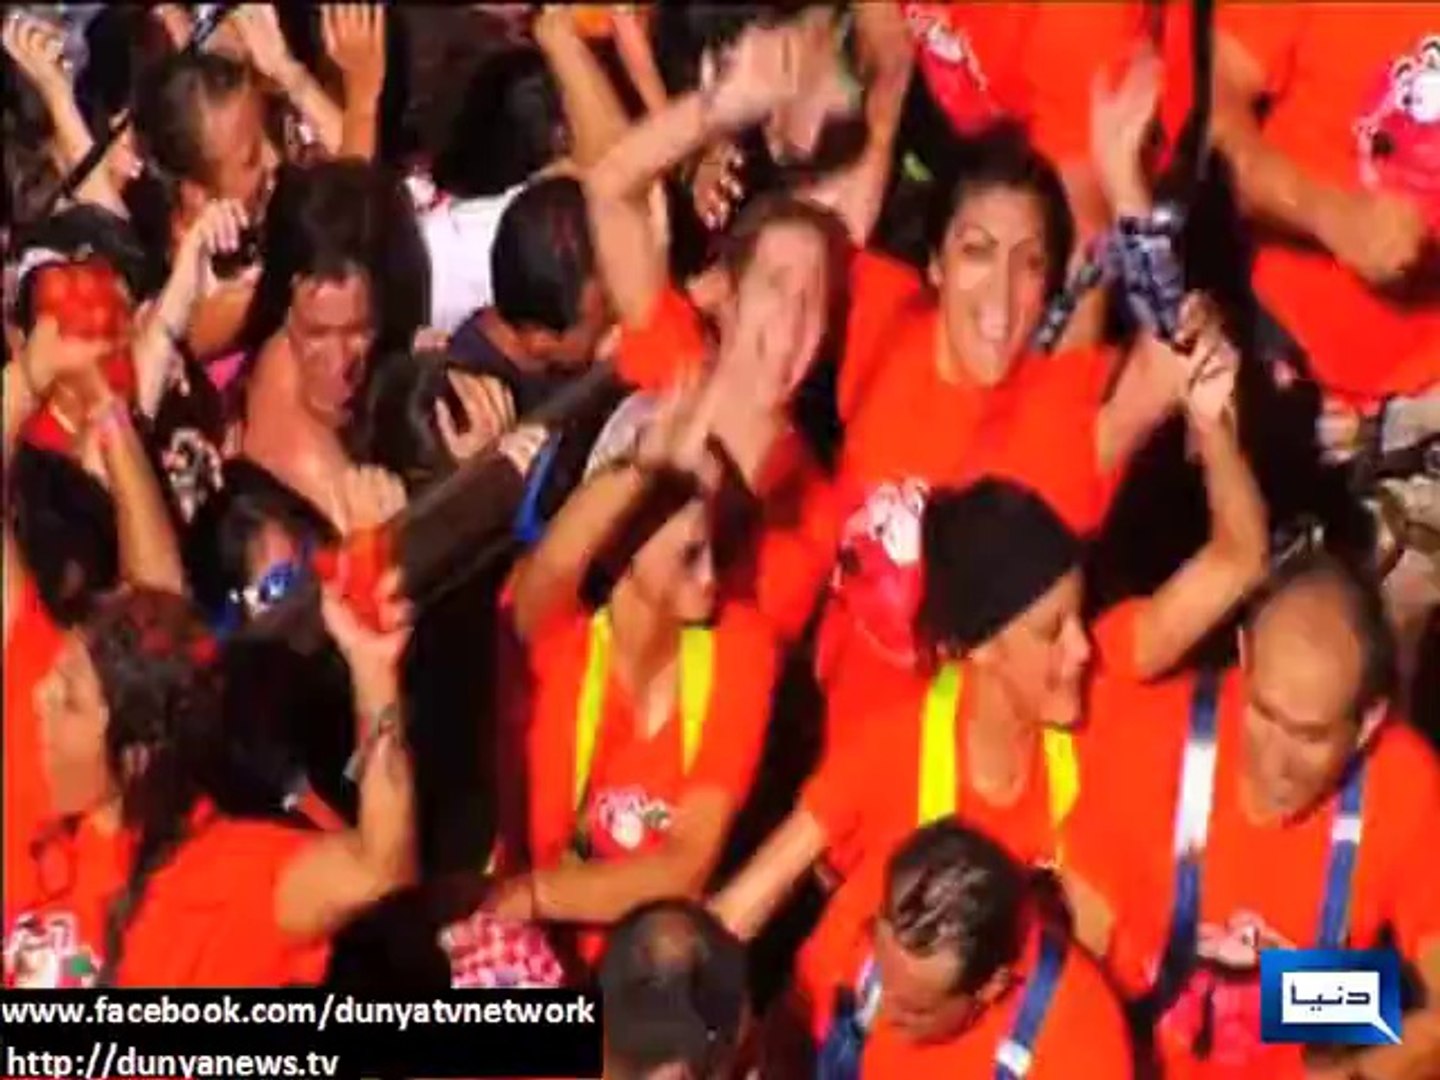 Dunya News - Food fight for tomato festival in Spain